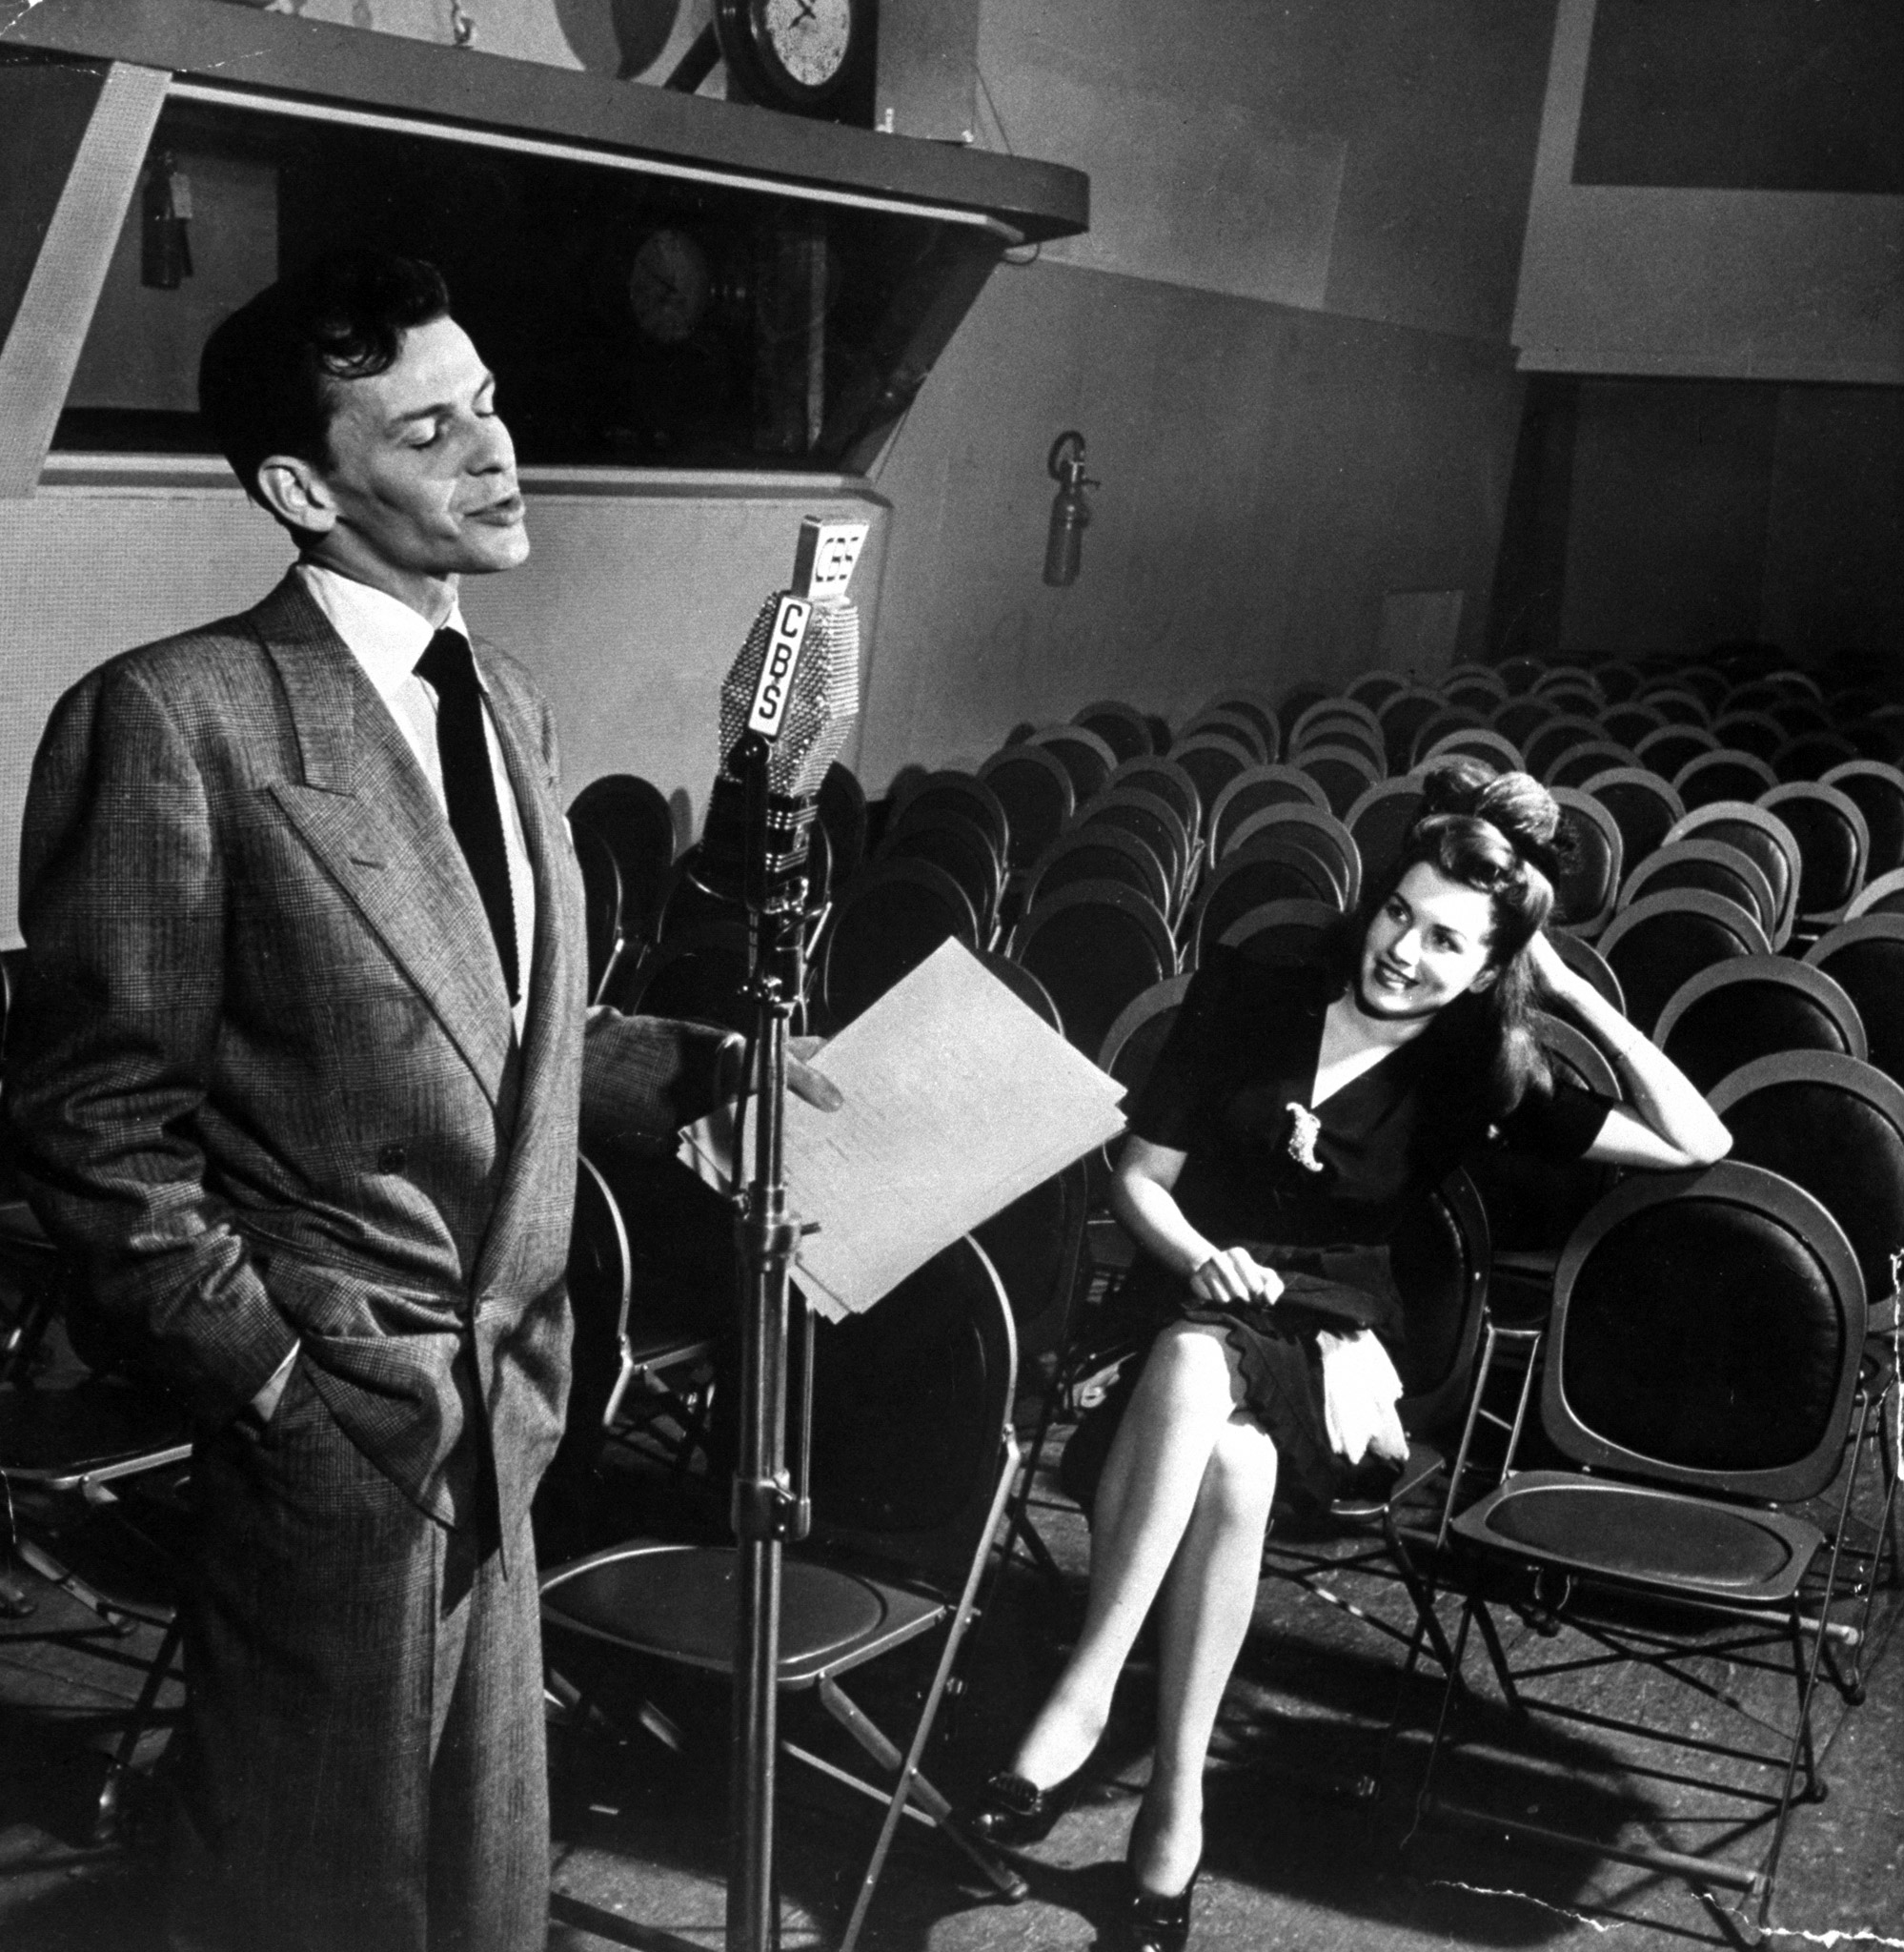 Frank Sinatra singing Close to You in CBS radio broadcasting studio as his admirer Rita Stearns, the winner of the Why I Like Frank Sinatra contest, looks on, in the audience, 1944.